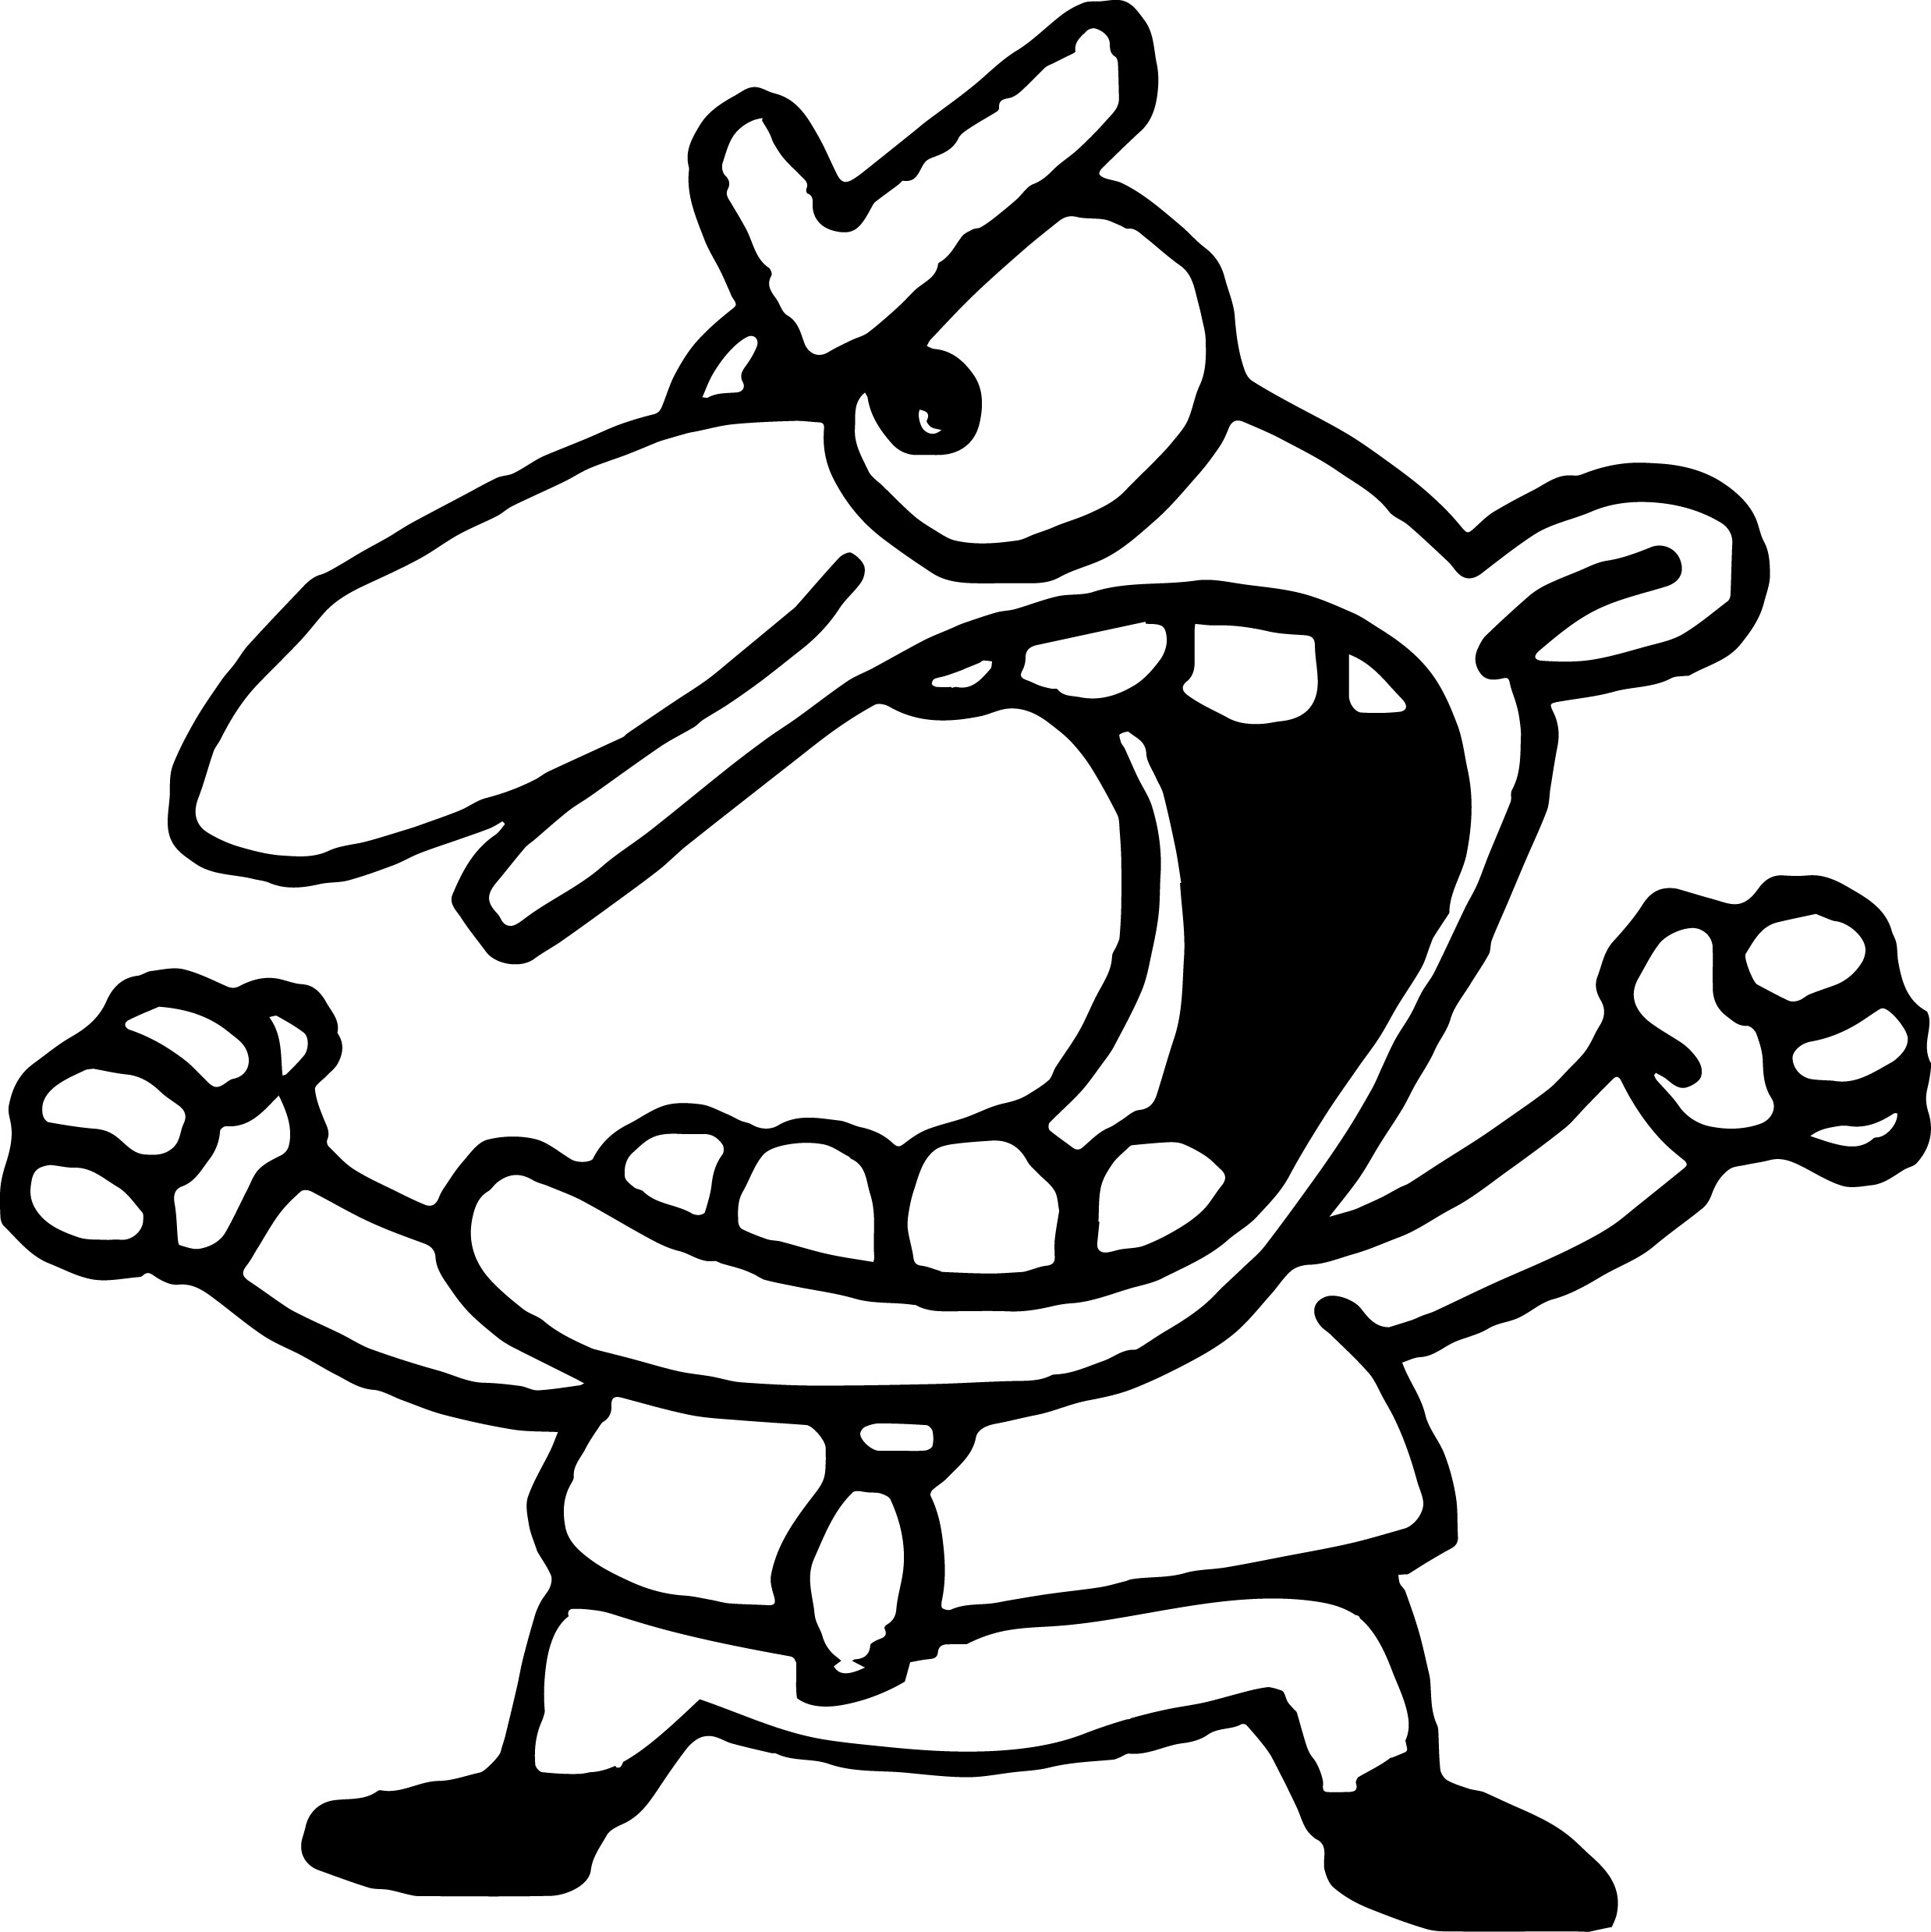 Angry Man Anger Management Coloring Page | Wecoloringpage.com